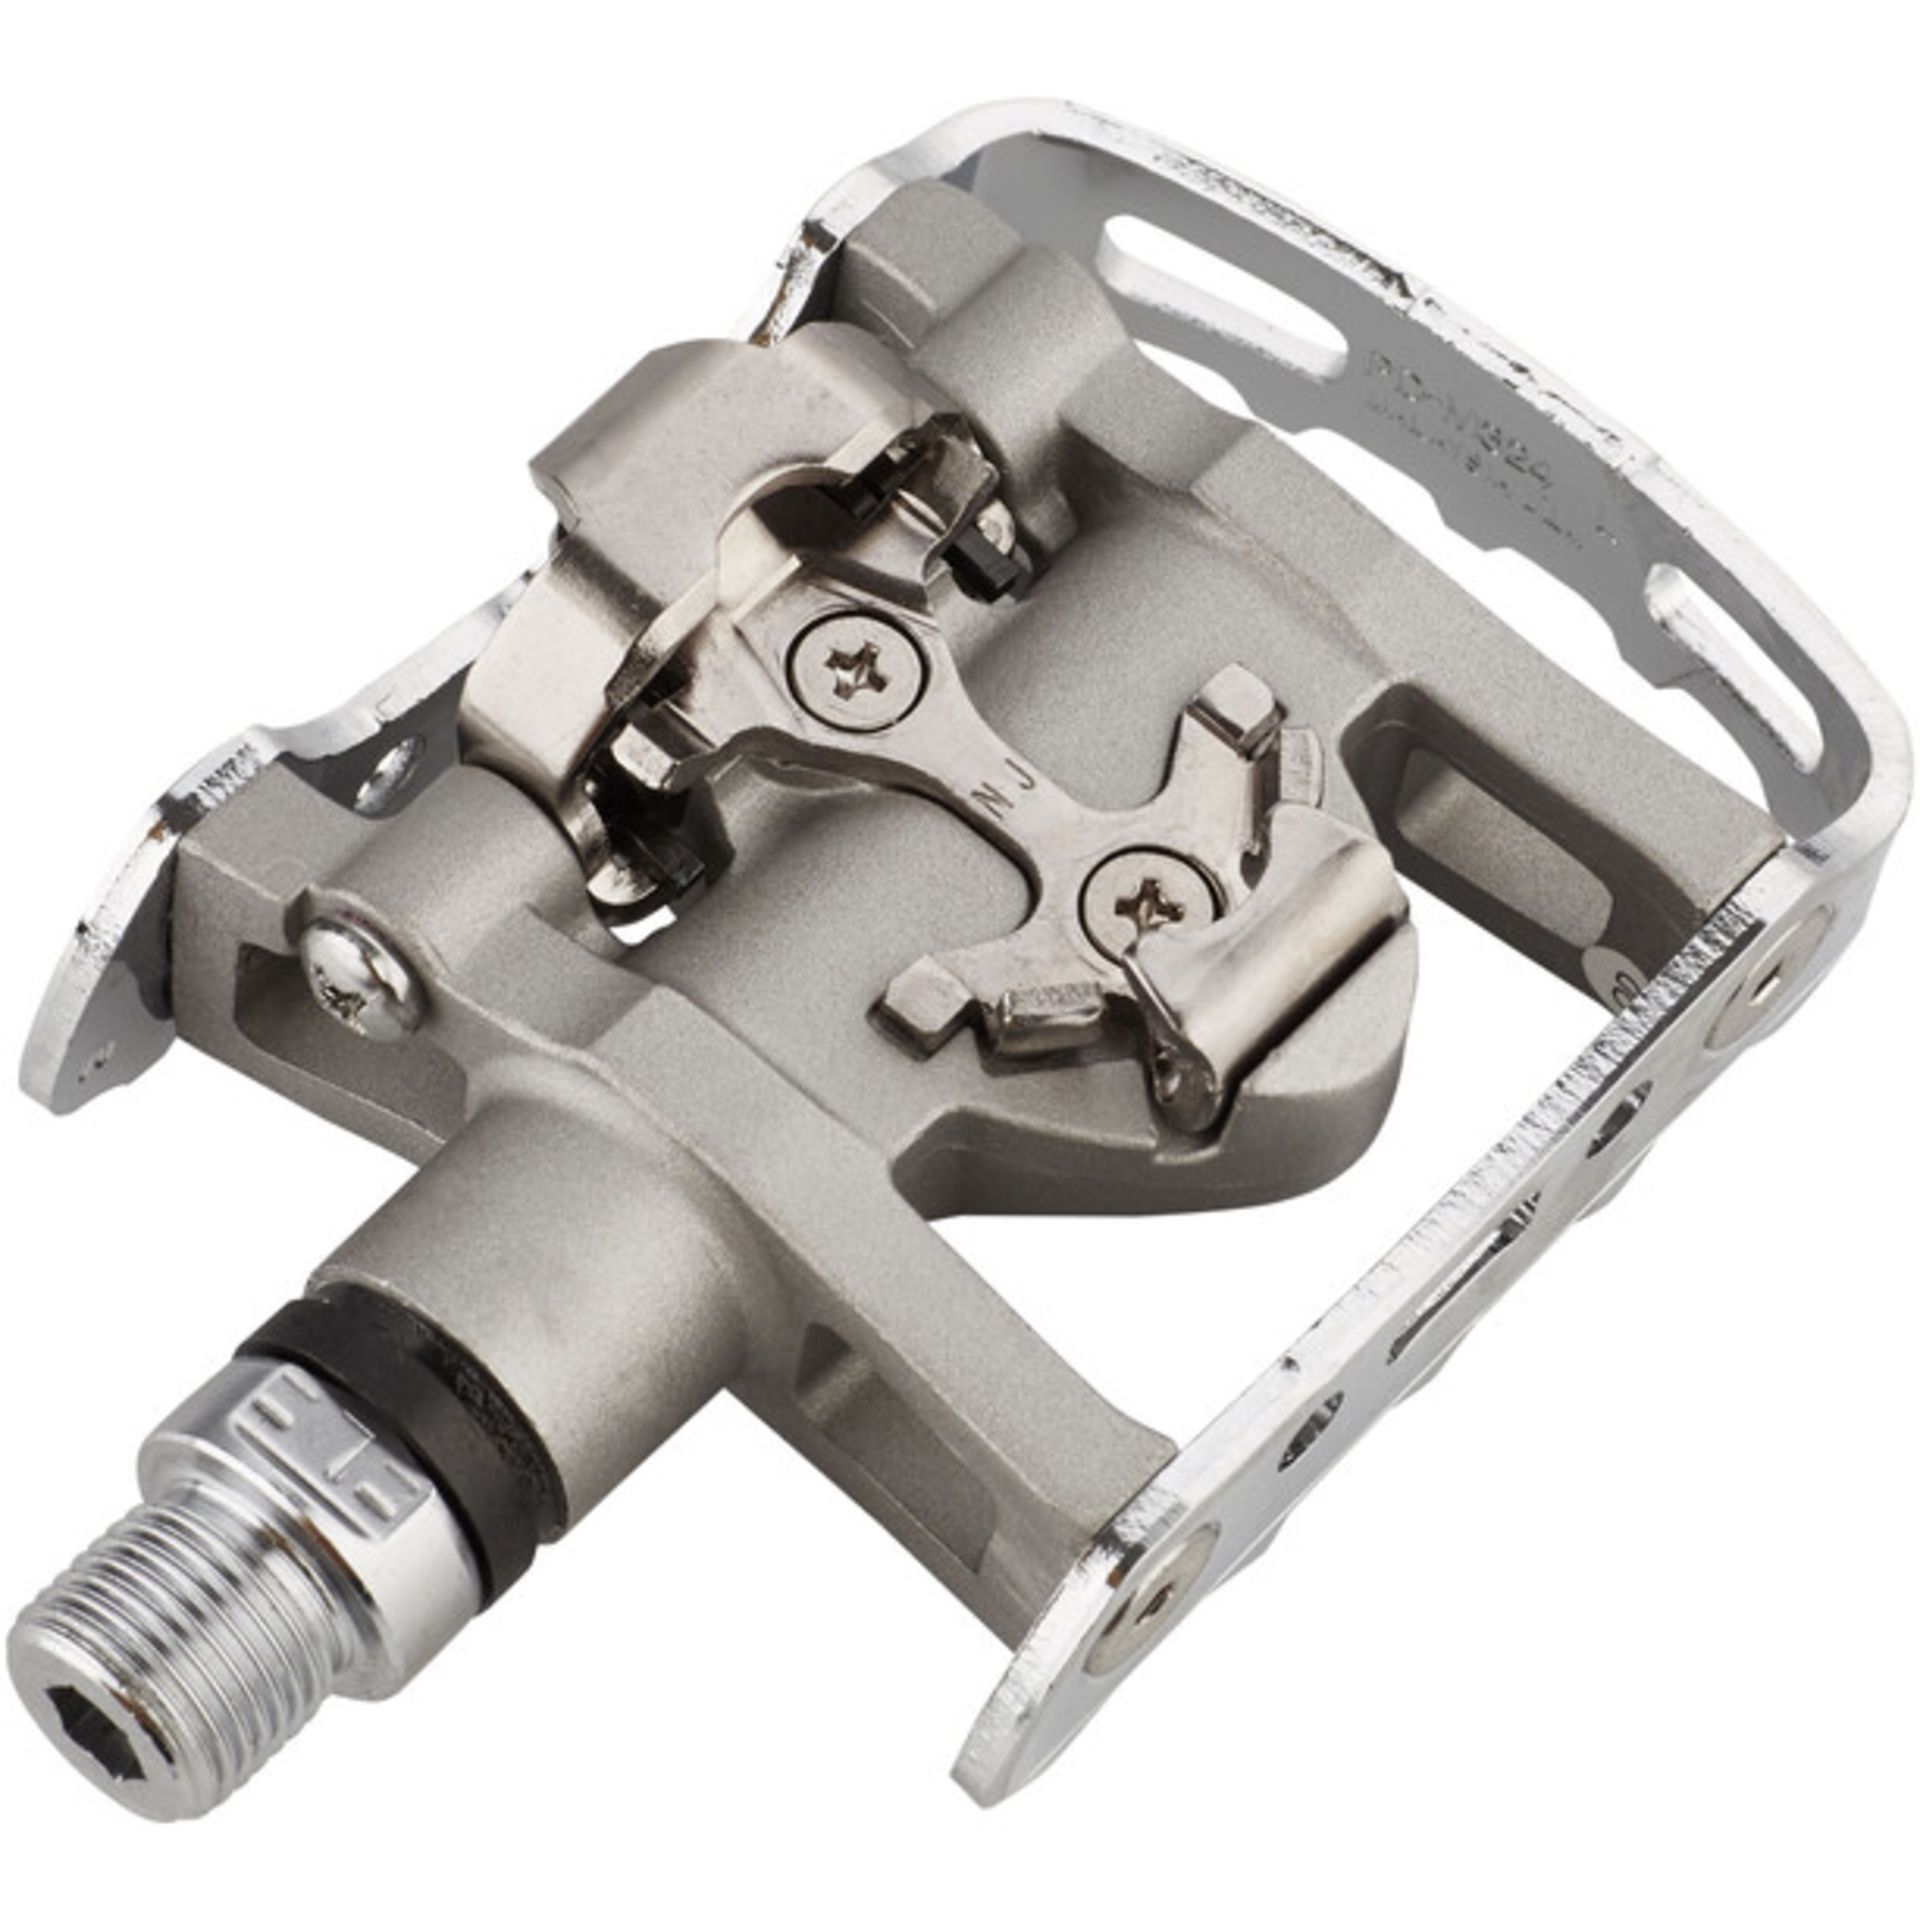 Shimano PD-M324 SPD Pedals, silver - Image 2 of 6